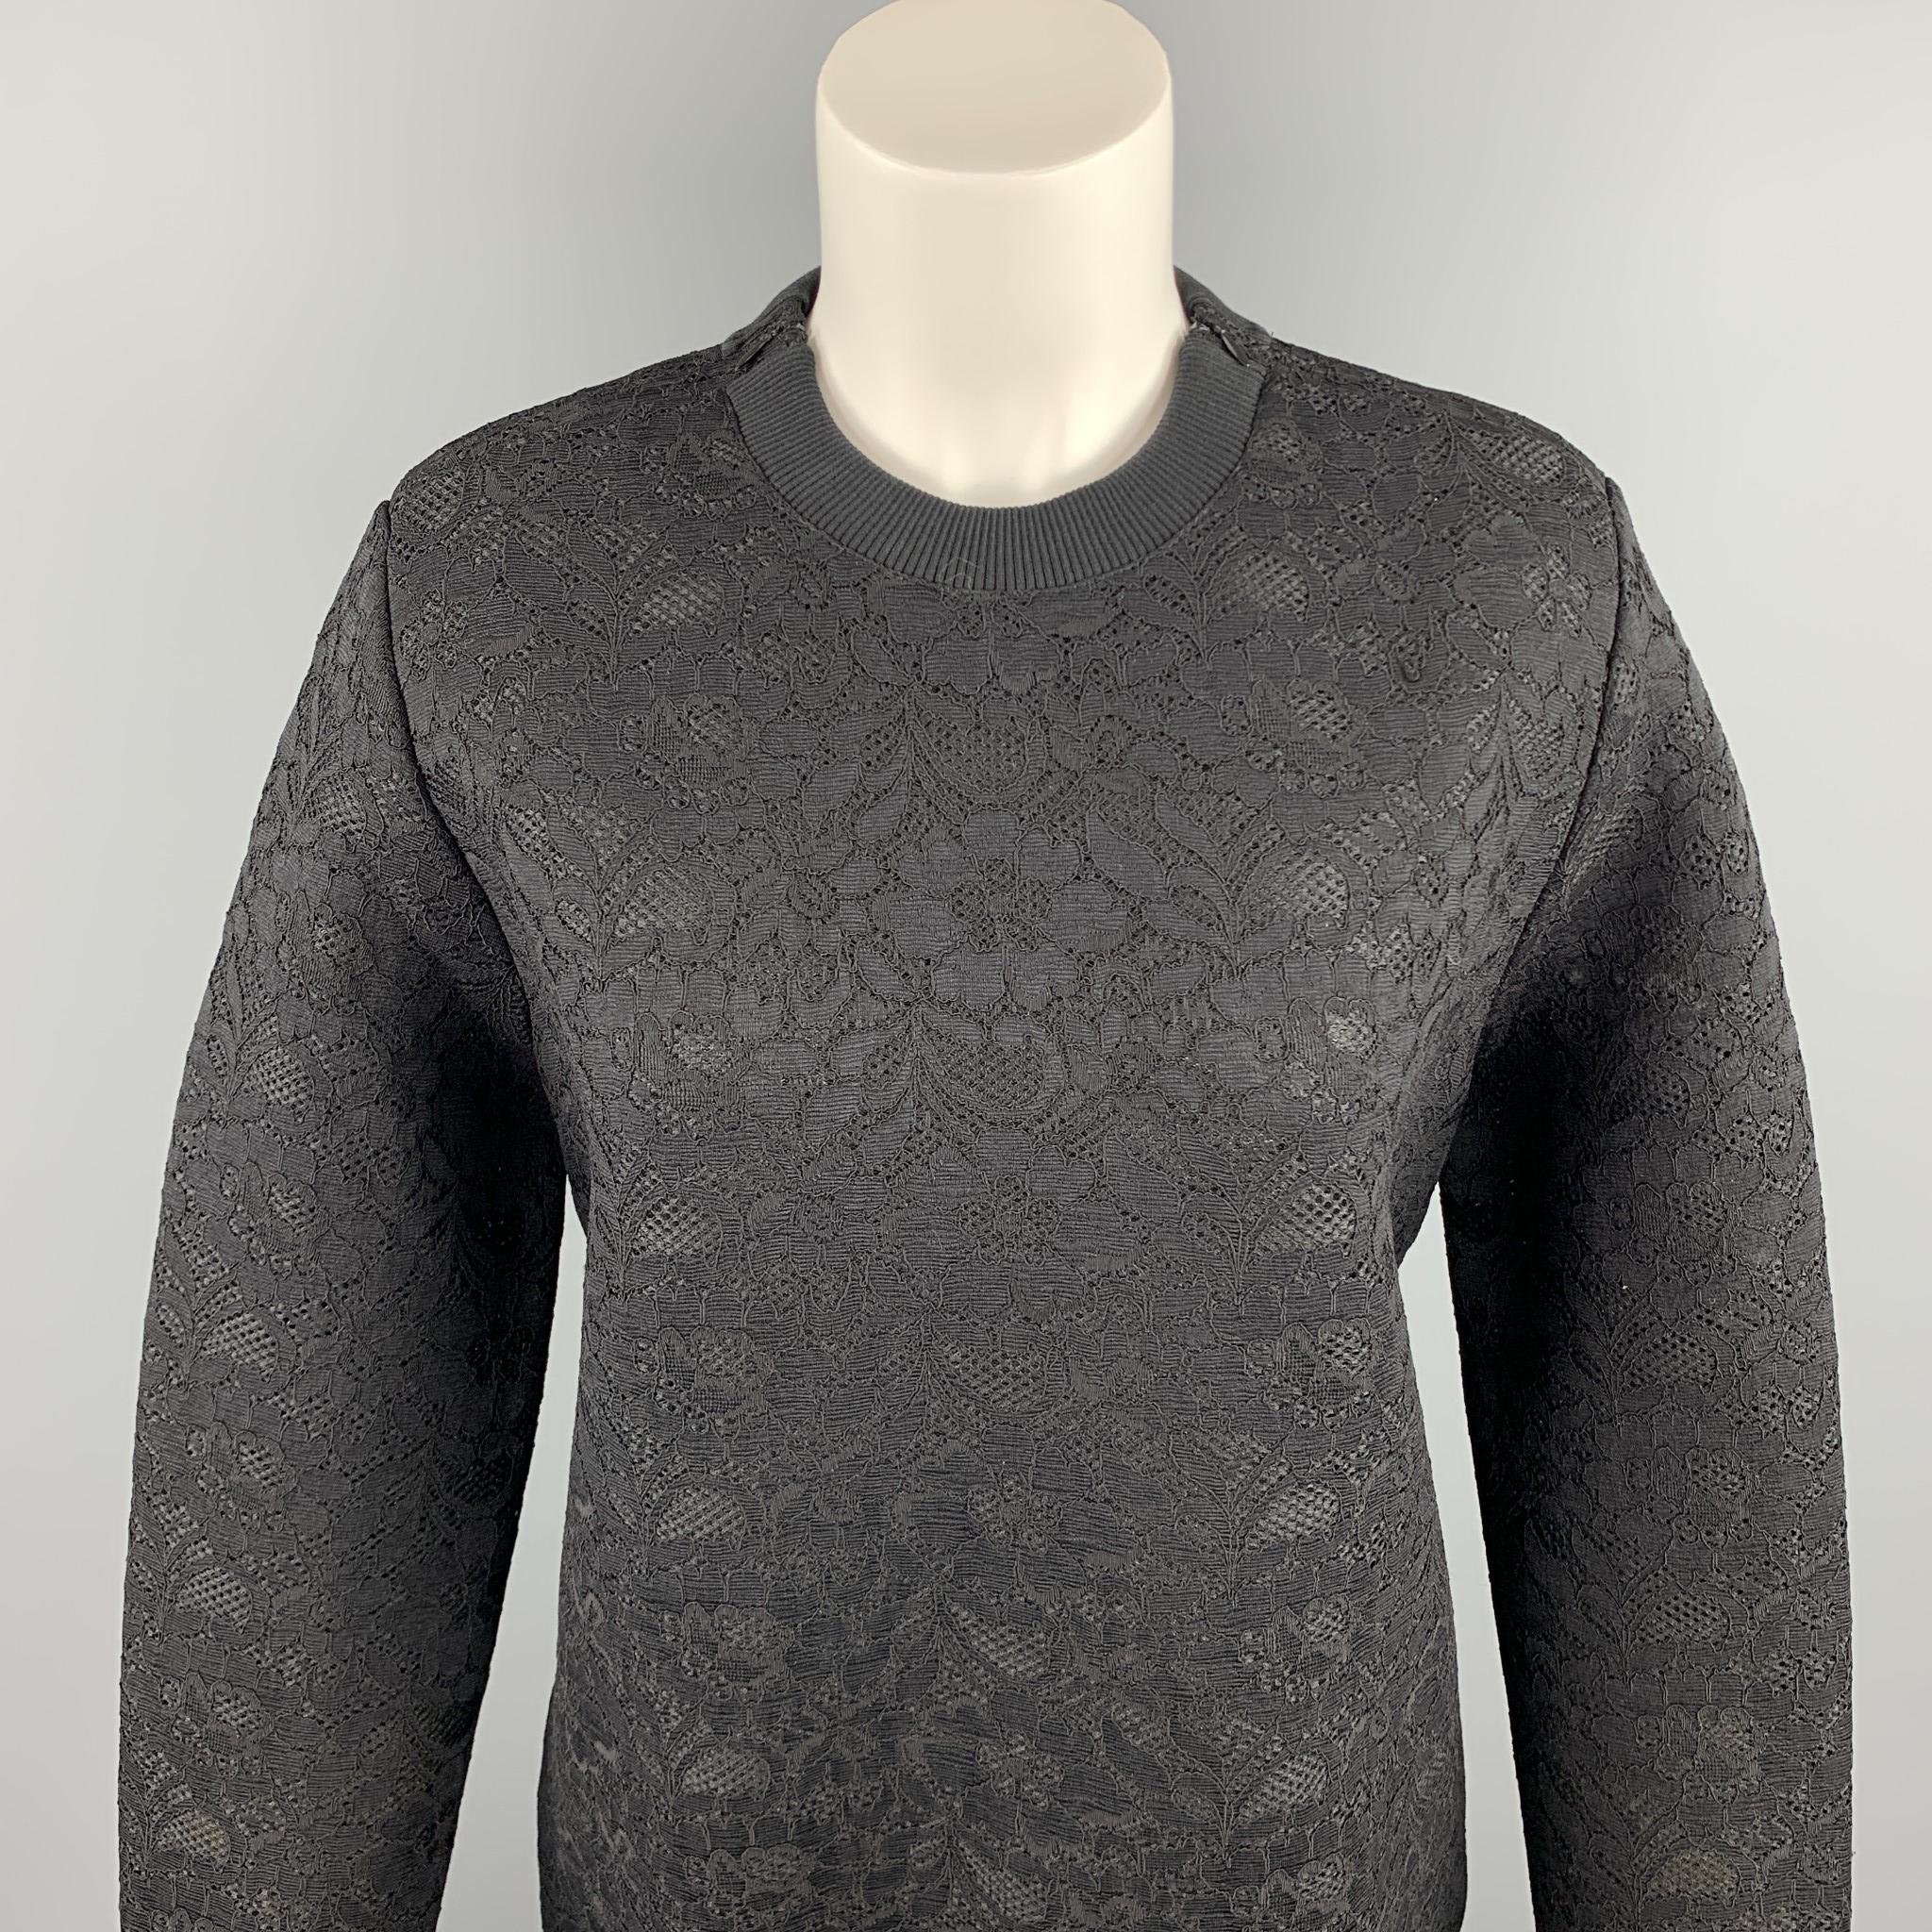 GIVENCHY pullover comes in a black lace polyester blend featuring shoulder zipper details and a crew-neck. Made in Italy.

New With Tags.
Marked: IT 36

Measurements:

Shoulder: 16 in. 
Bust: 40 in. 
Sleeve: 27.5 in. 
Length: 26 in. 